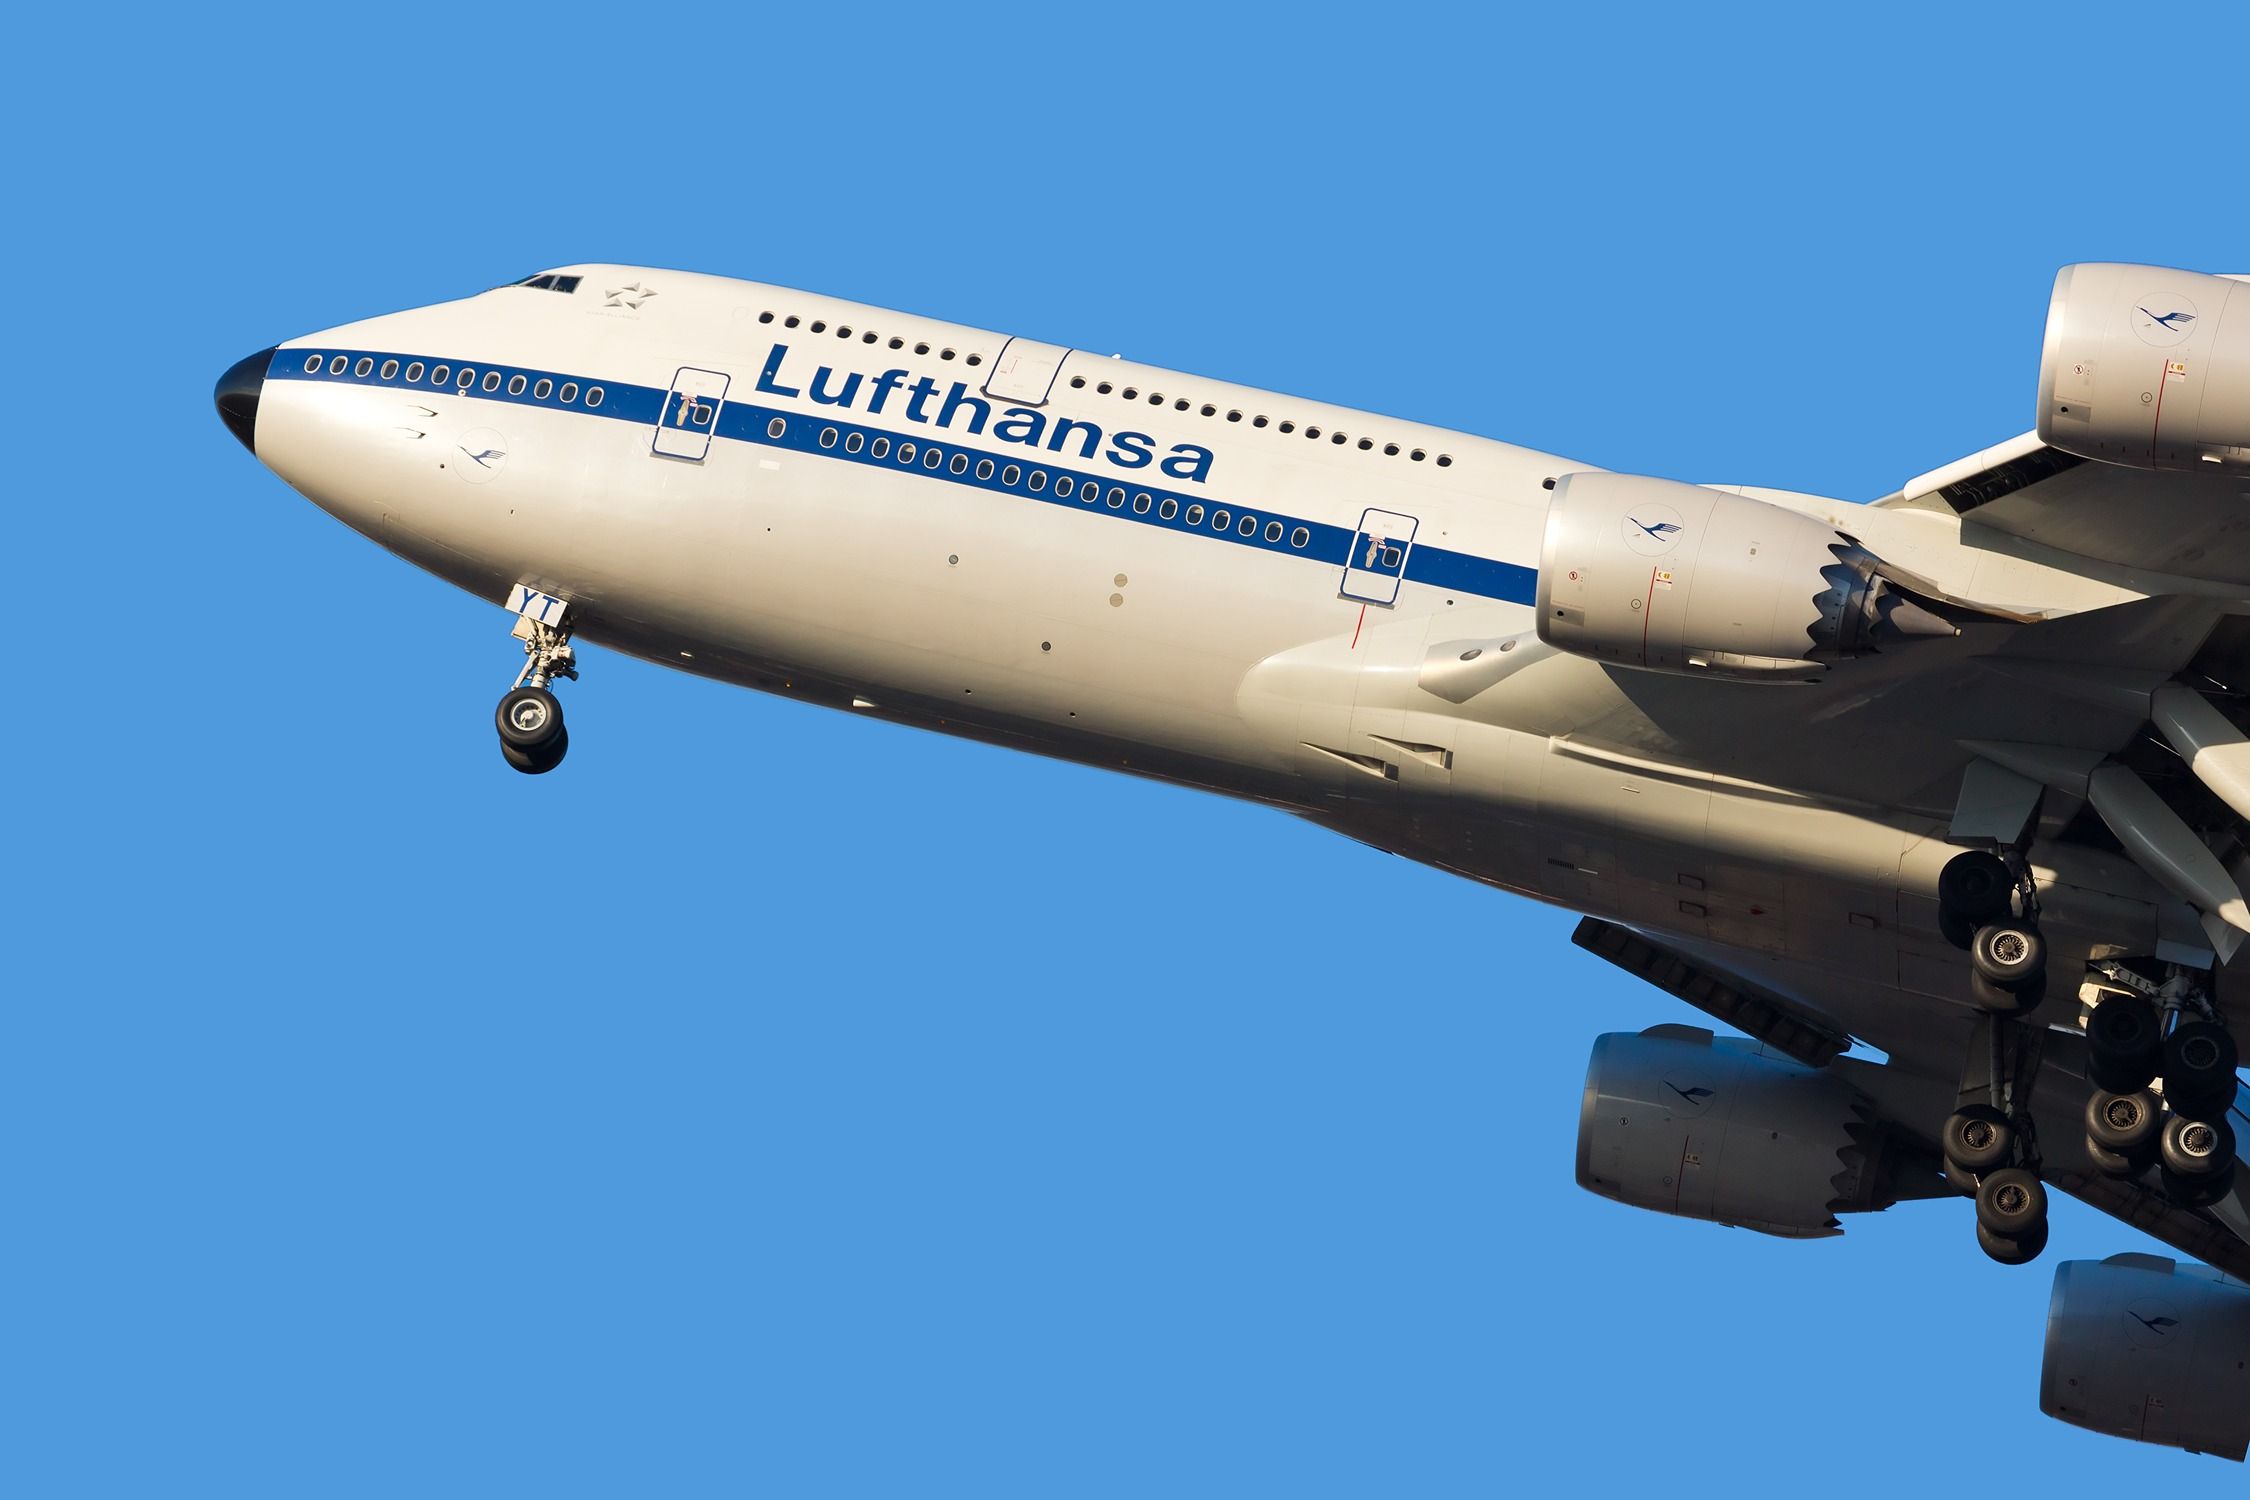 Lufthansa Boeing 747-8 with a retro livery landing shutterstock_1260600097